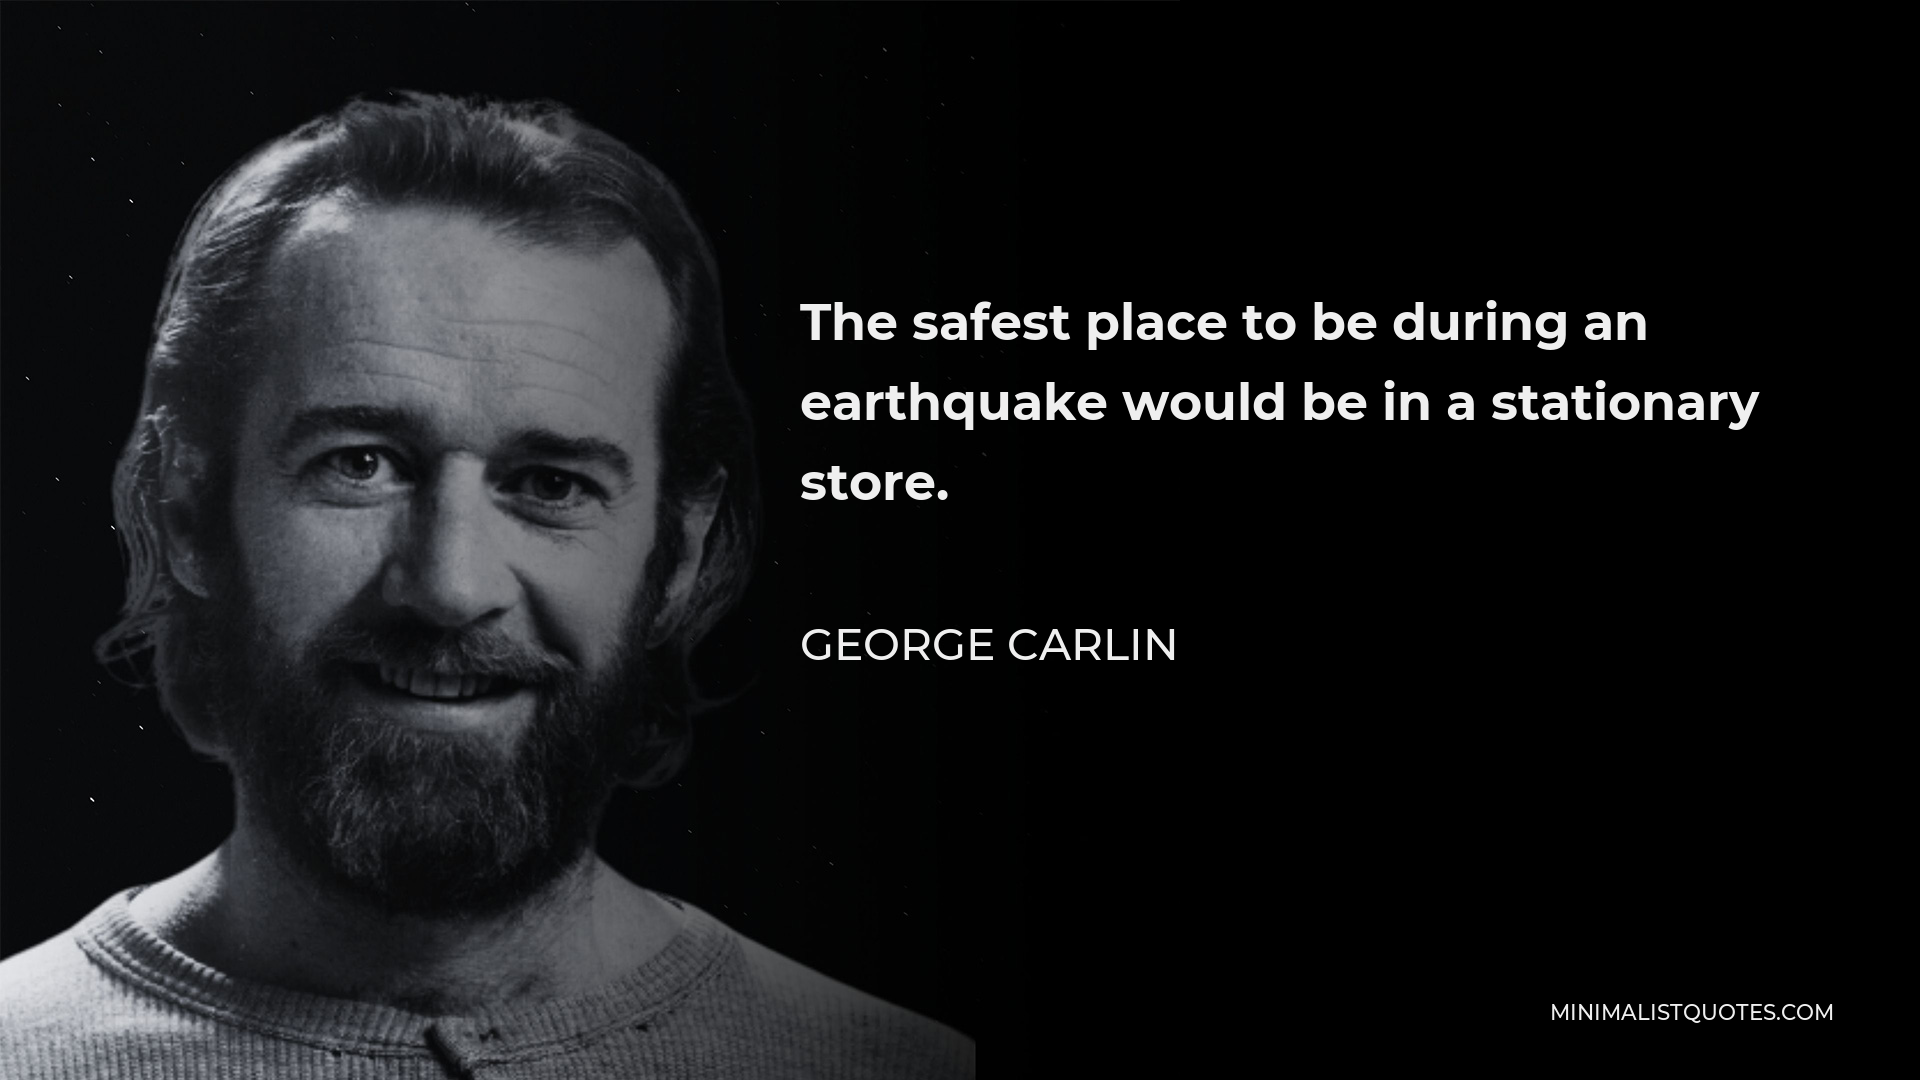 George Carlin Quote - The safest place to be during an earthquake would be in a stationary store.